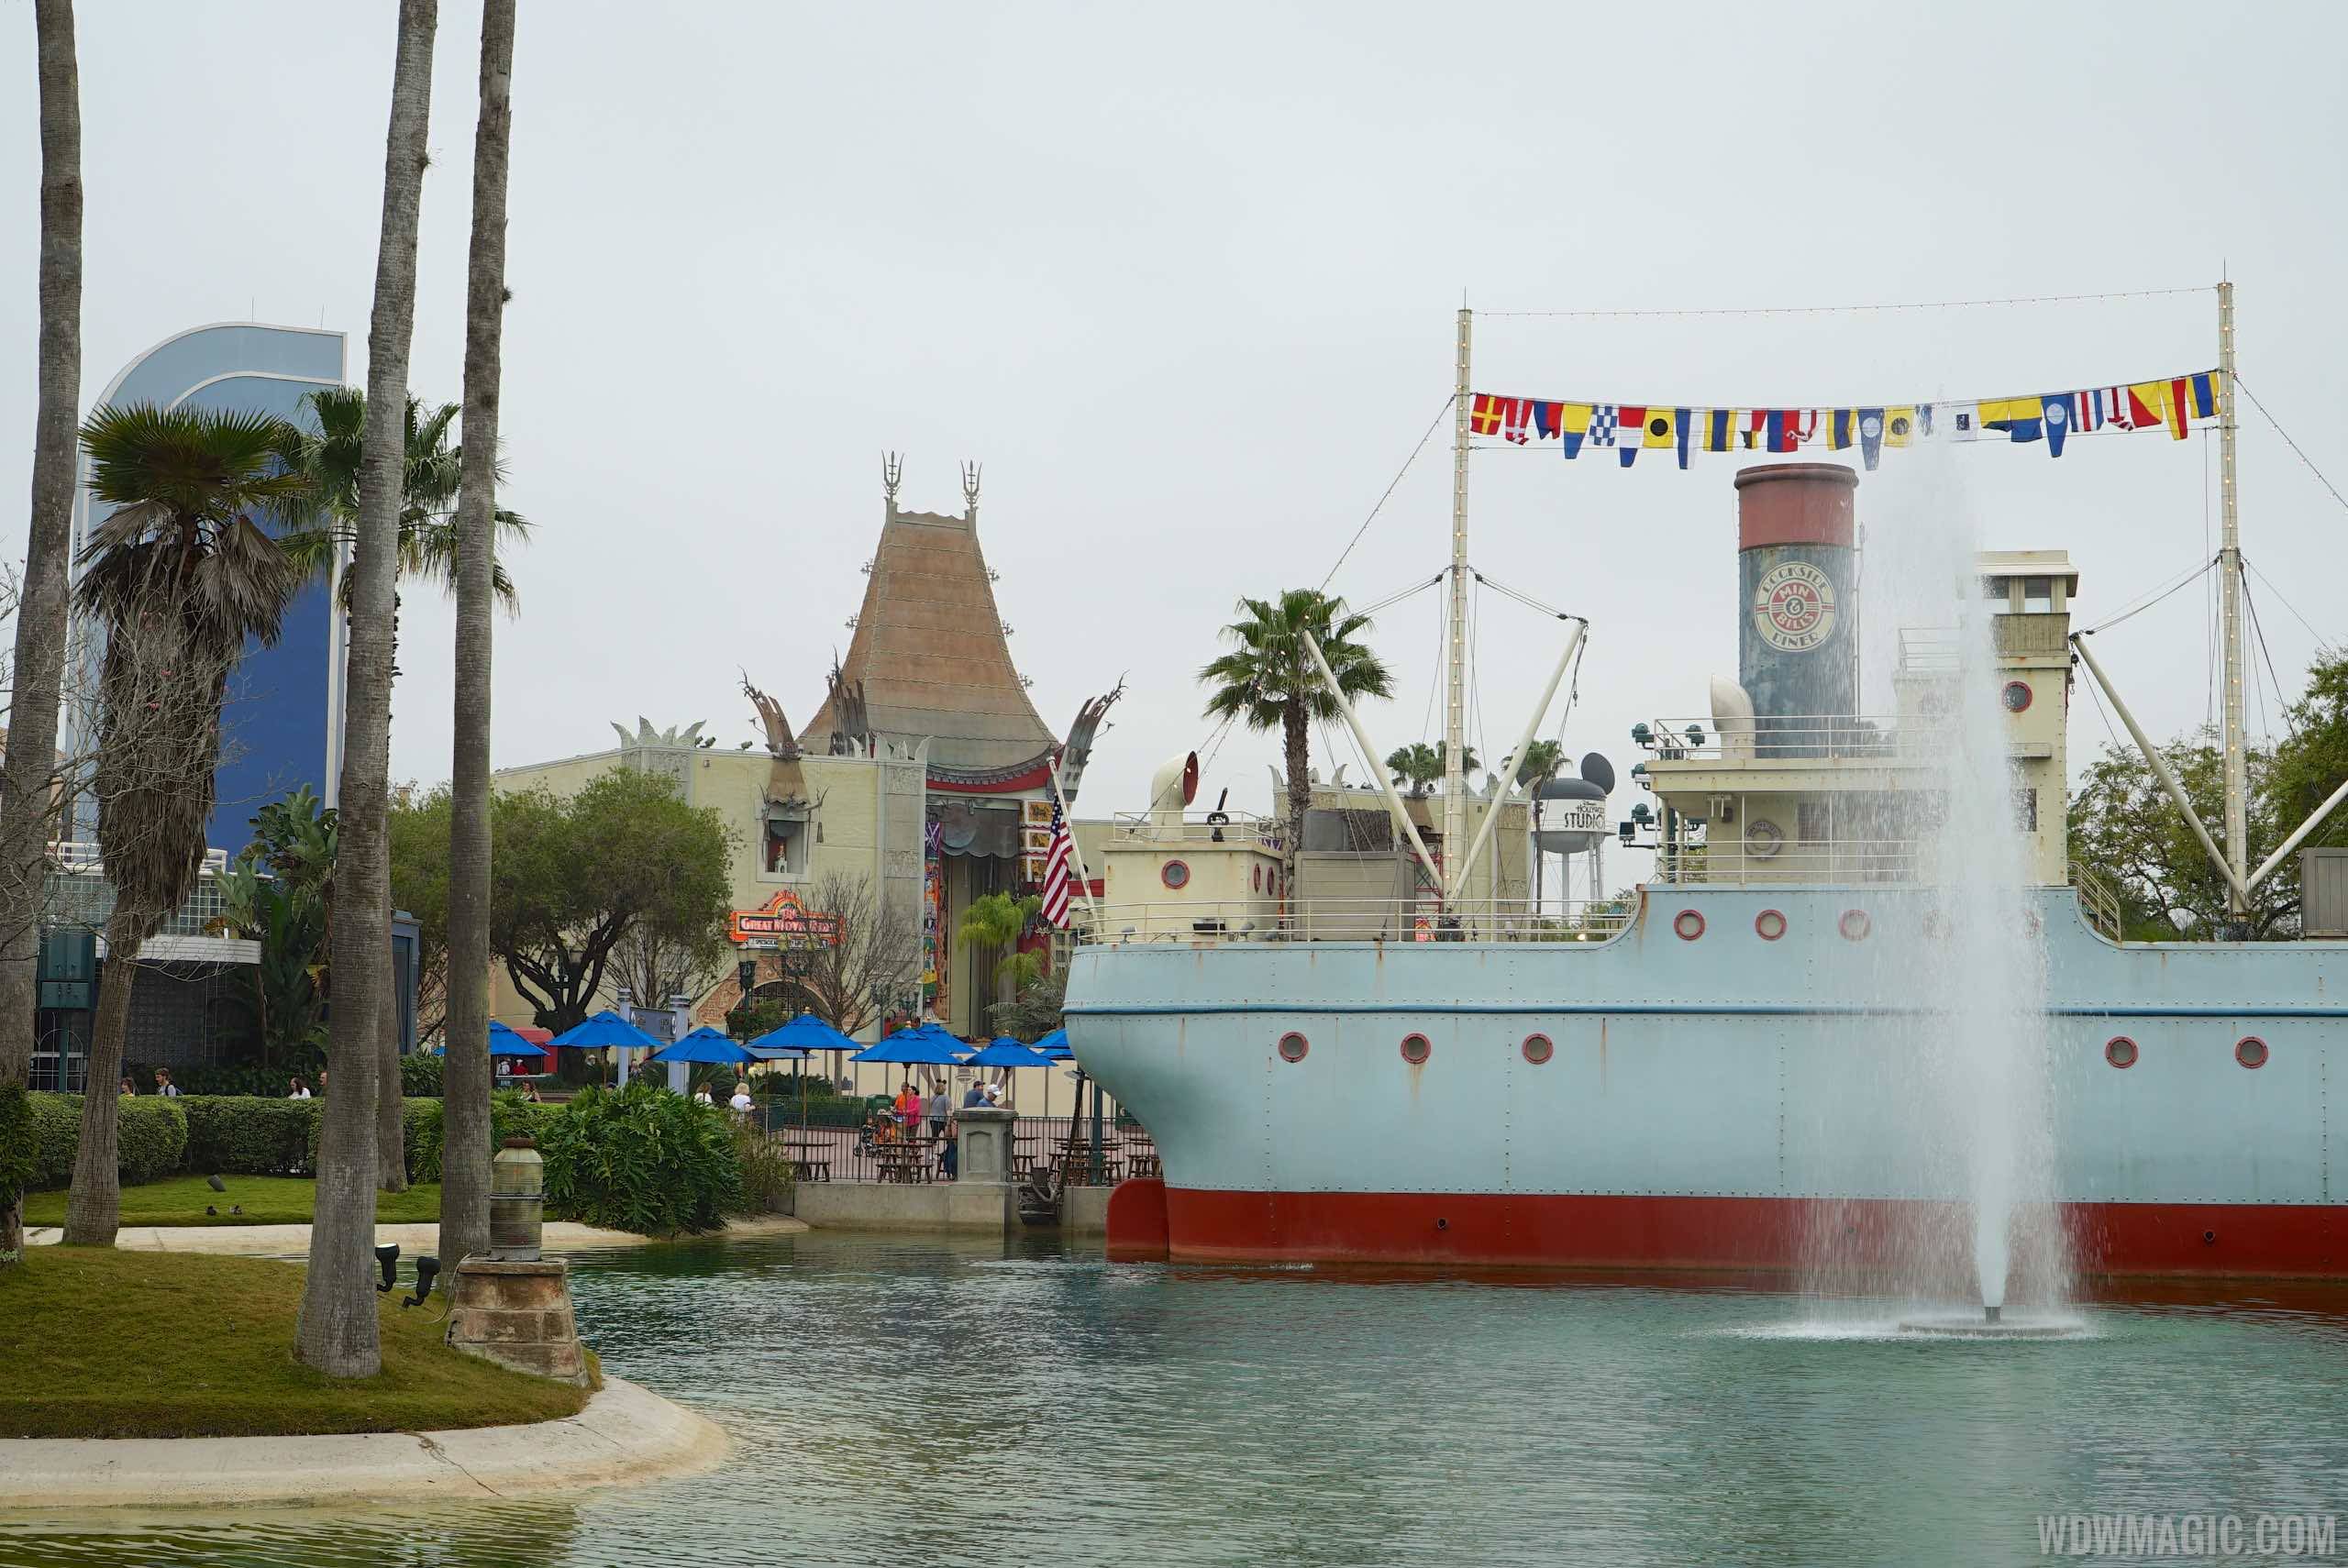 PHOTOS - Sorcerer Mickey Hat icon demolition very near complete